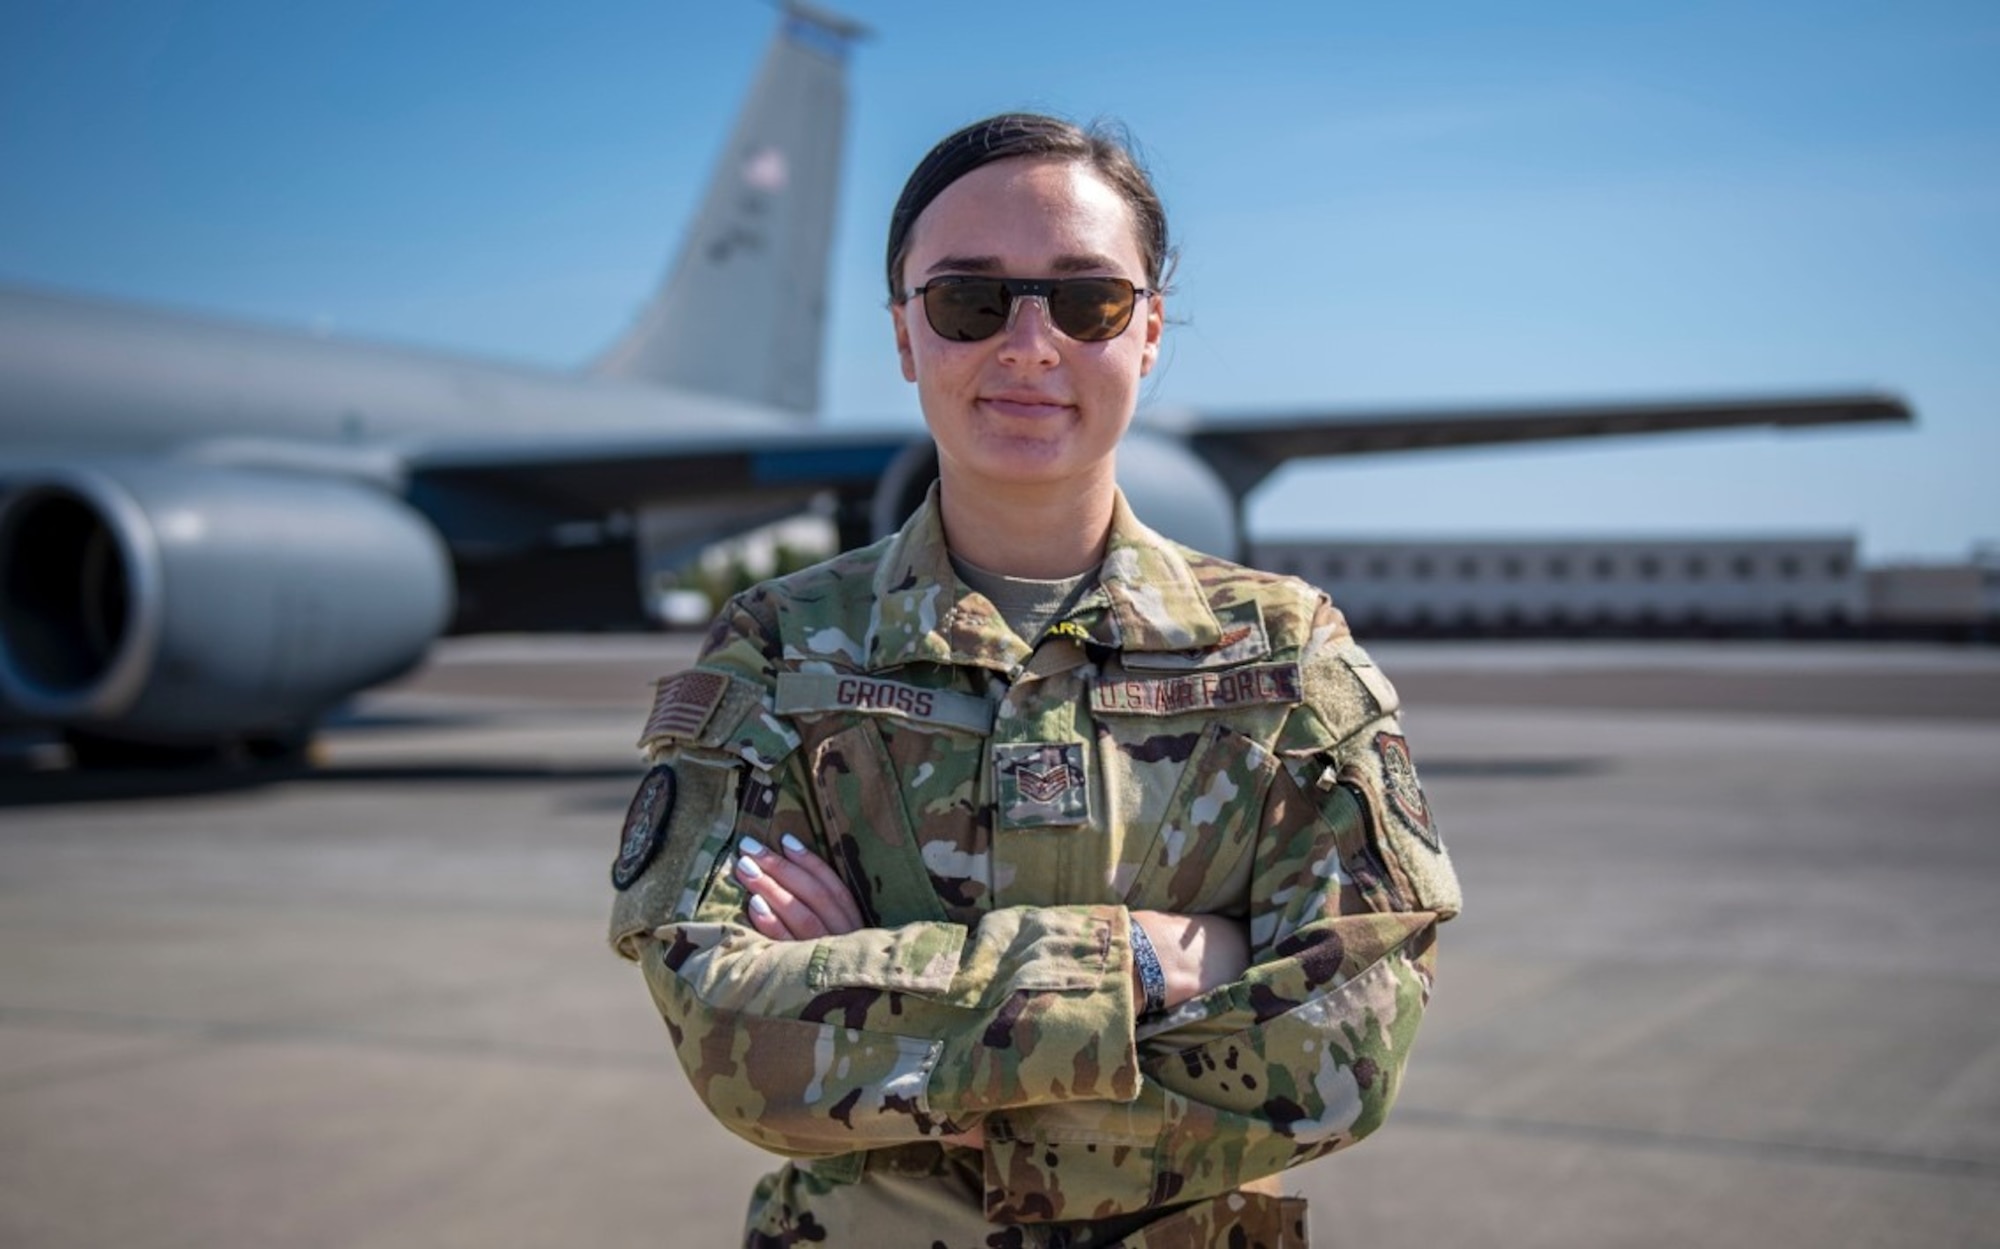 U.S. Air Force Staff Sgt. Jacqueline Gross, a KC-135 Stratotanker aircraft boom operator assigned to the 91st Air Refueling Squadron, MacDill Air Force Base, Florida, tests the new Aircrew Laser Eye Protection glasses at MacDill AFB June 23, 2022. A new version of the ALEP glasses was tested by Gross to evaluate the device’s effectiveness while performing in-flight aerial refueling. (U.S. Air Force photo by Airman 1st Class Lauren Cobin)